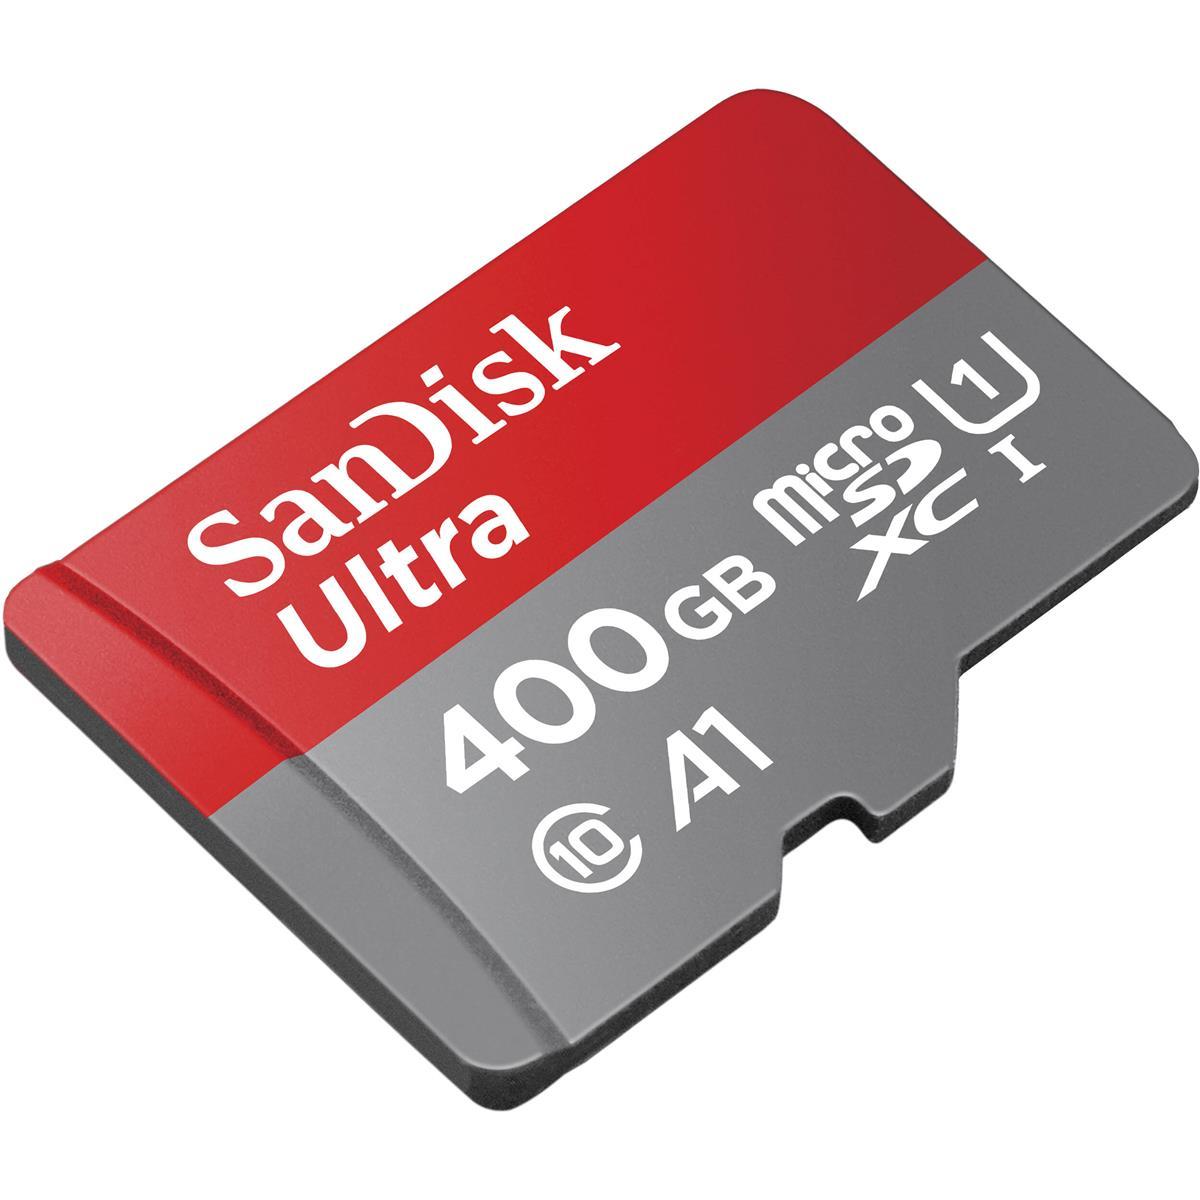 400GB SanDisk Ultra UHS-1 MicroSDXC Memory Card with Adapter for $16.99 Shipped